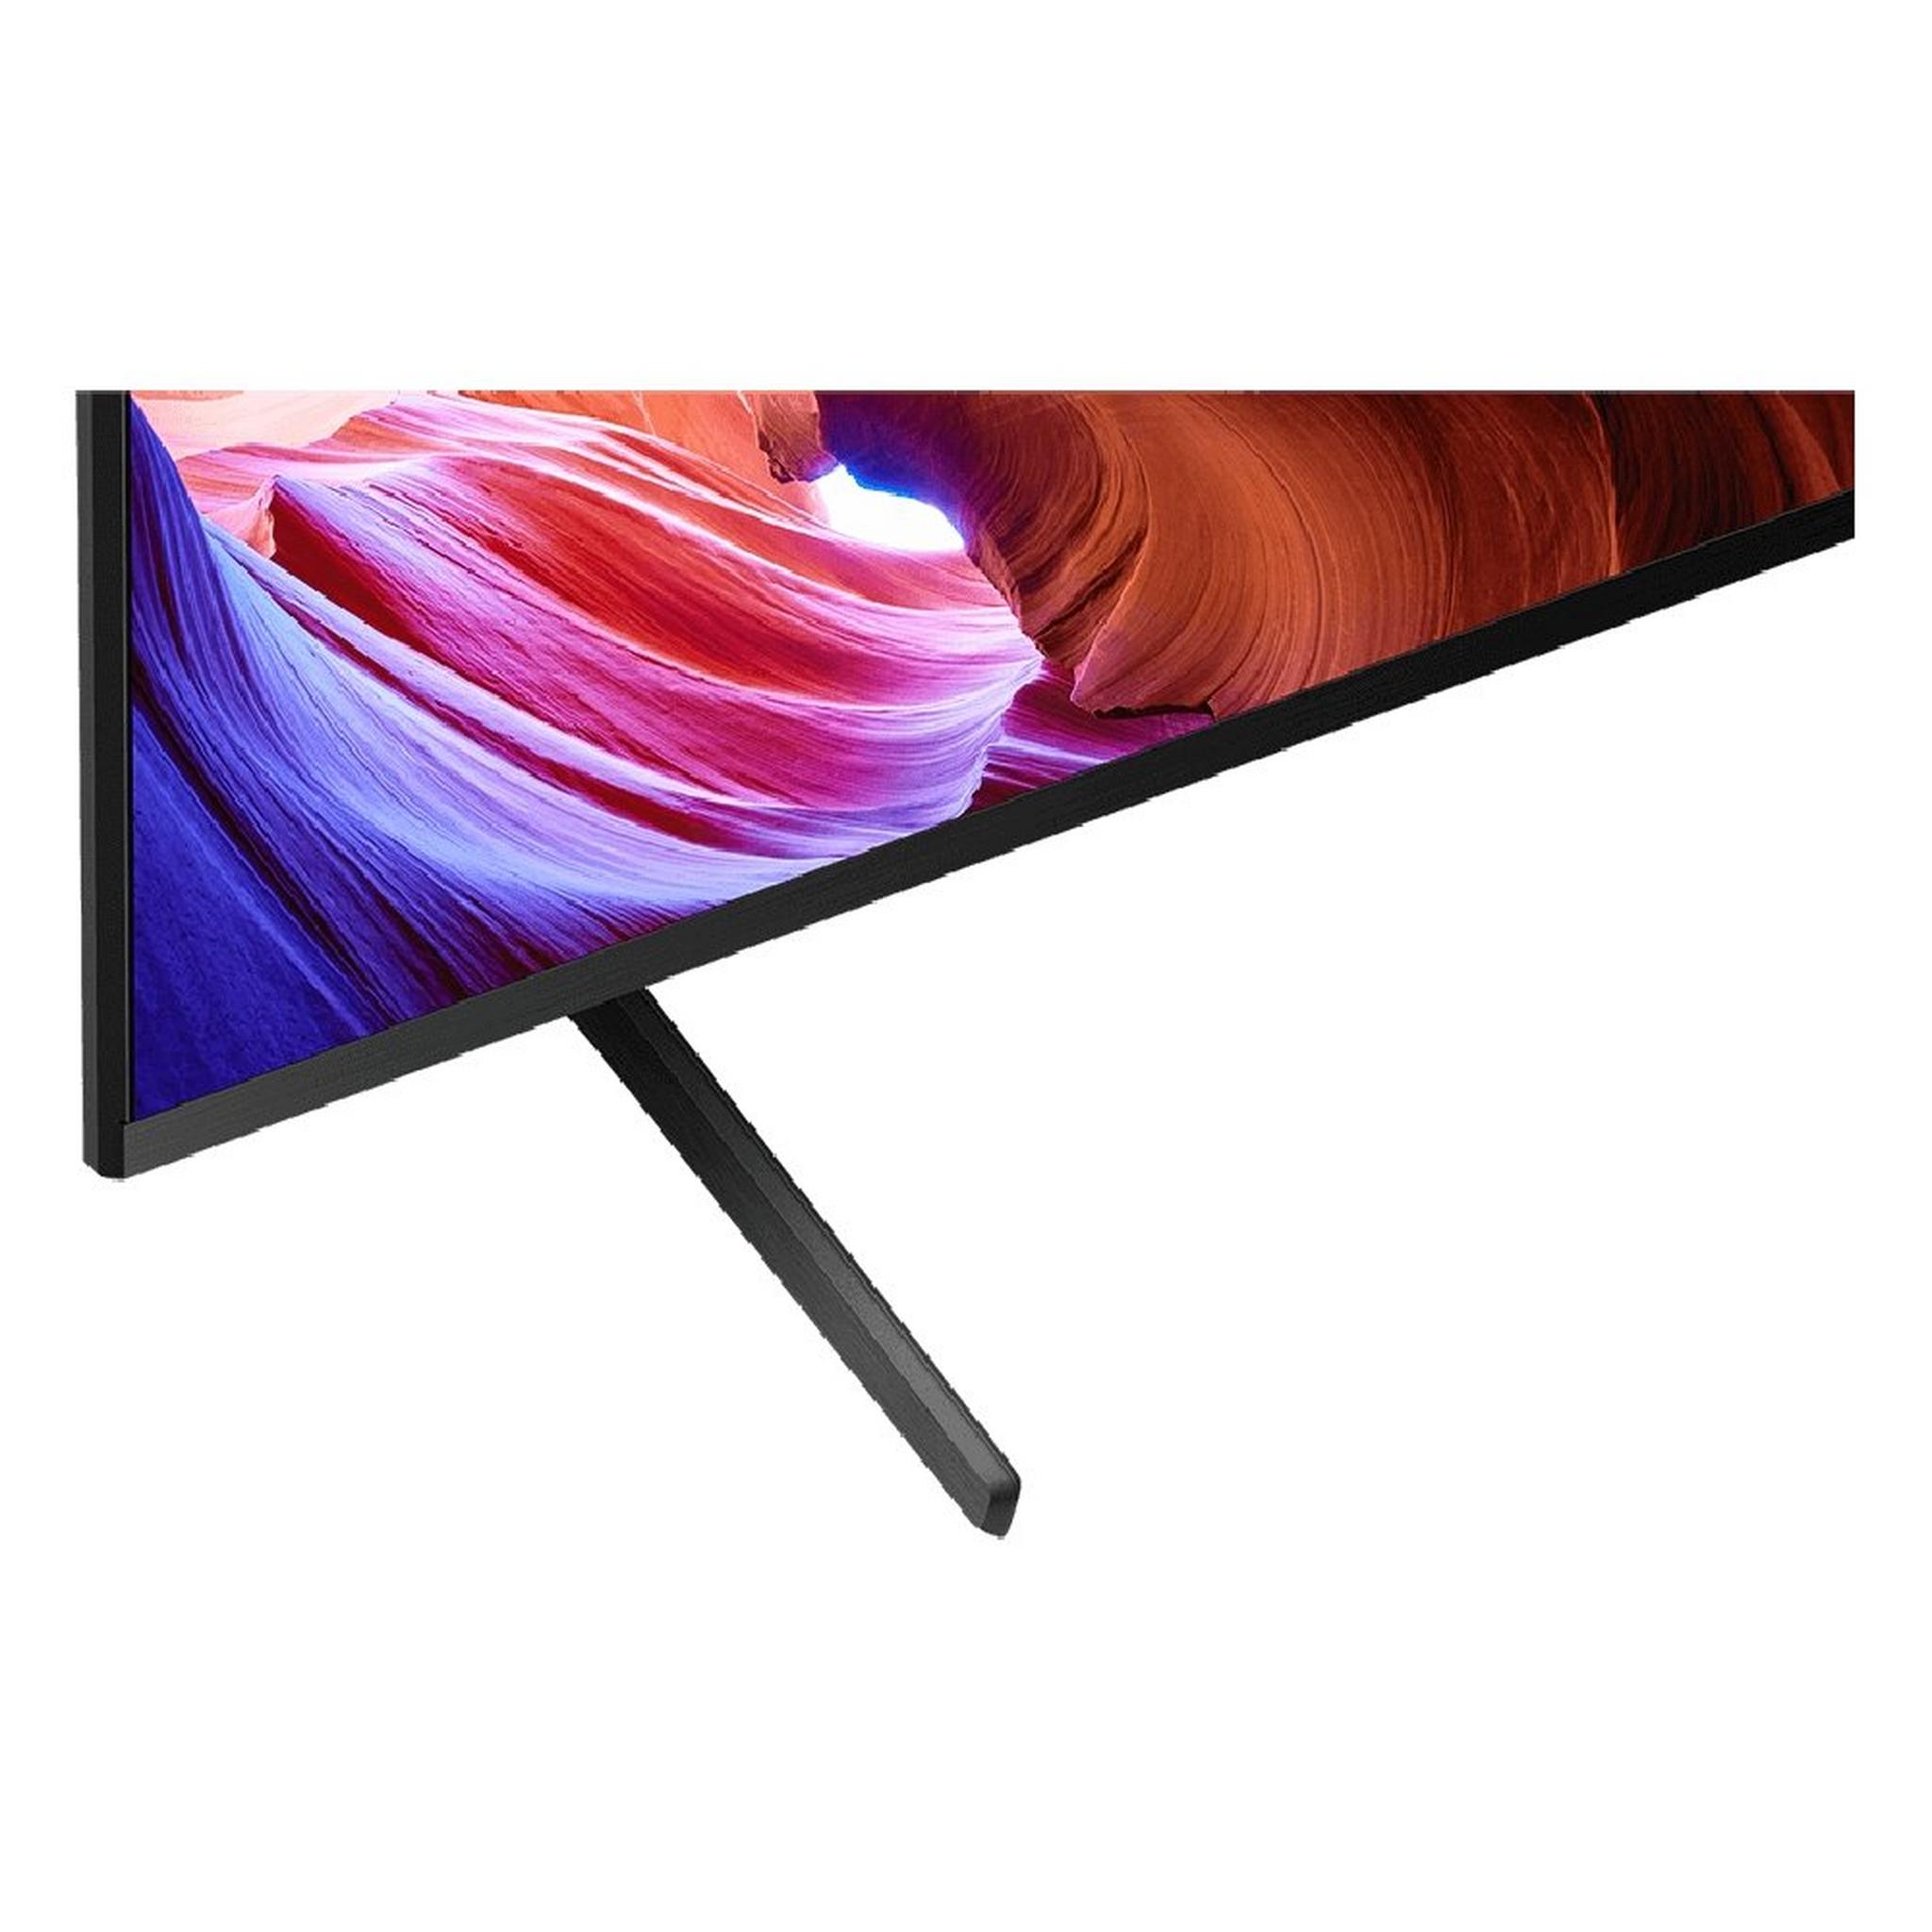 Sony Smart TV 65 inch Android UHD 4K HDR (KD-65X85K)